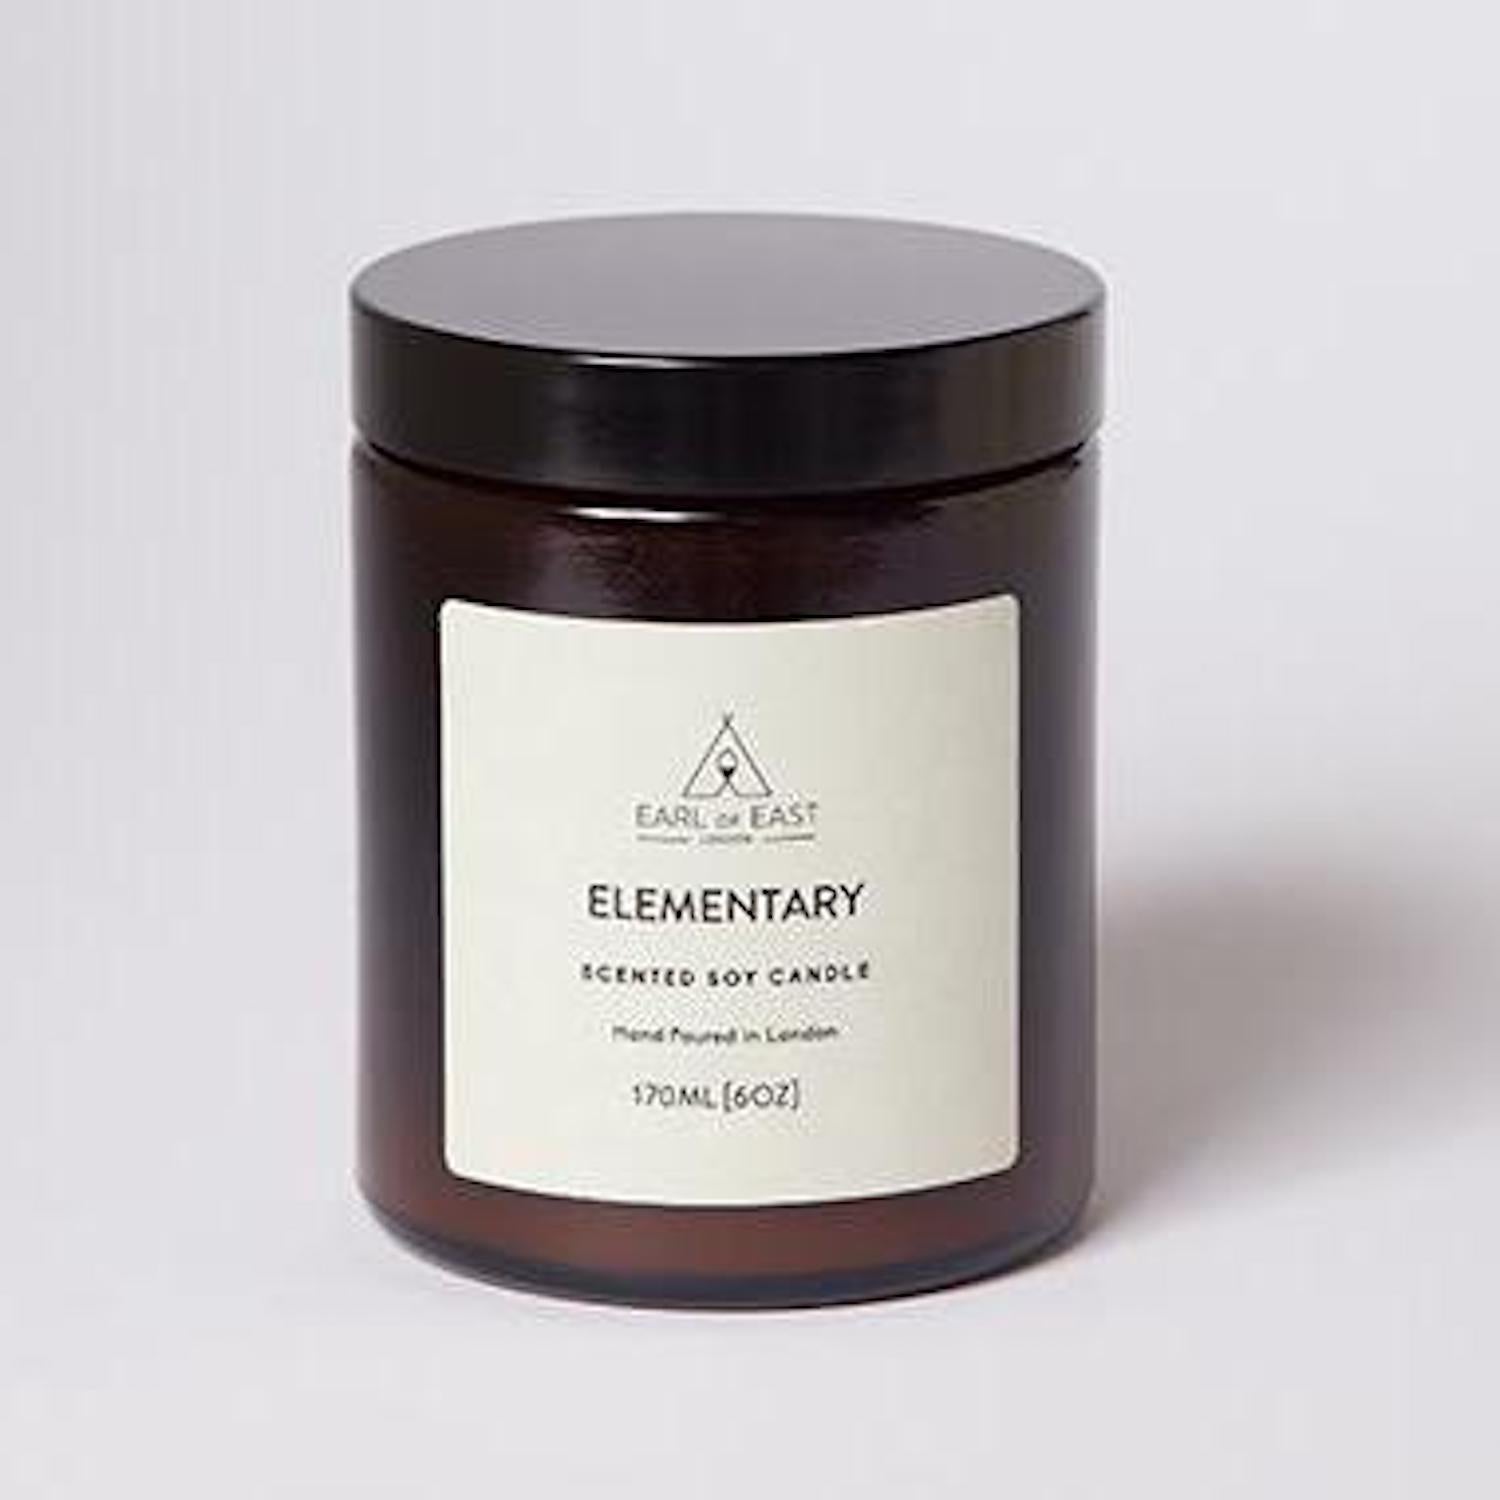 Elementary Candle - Earl of East